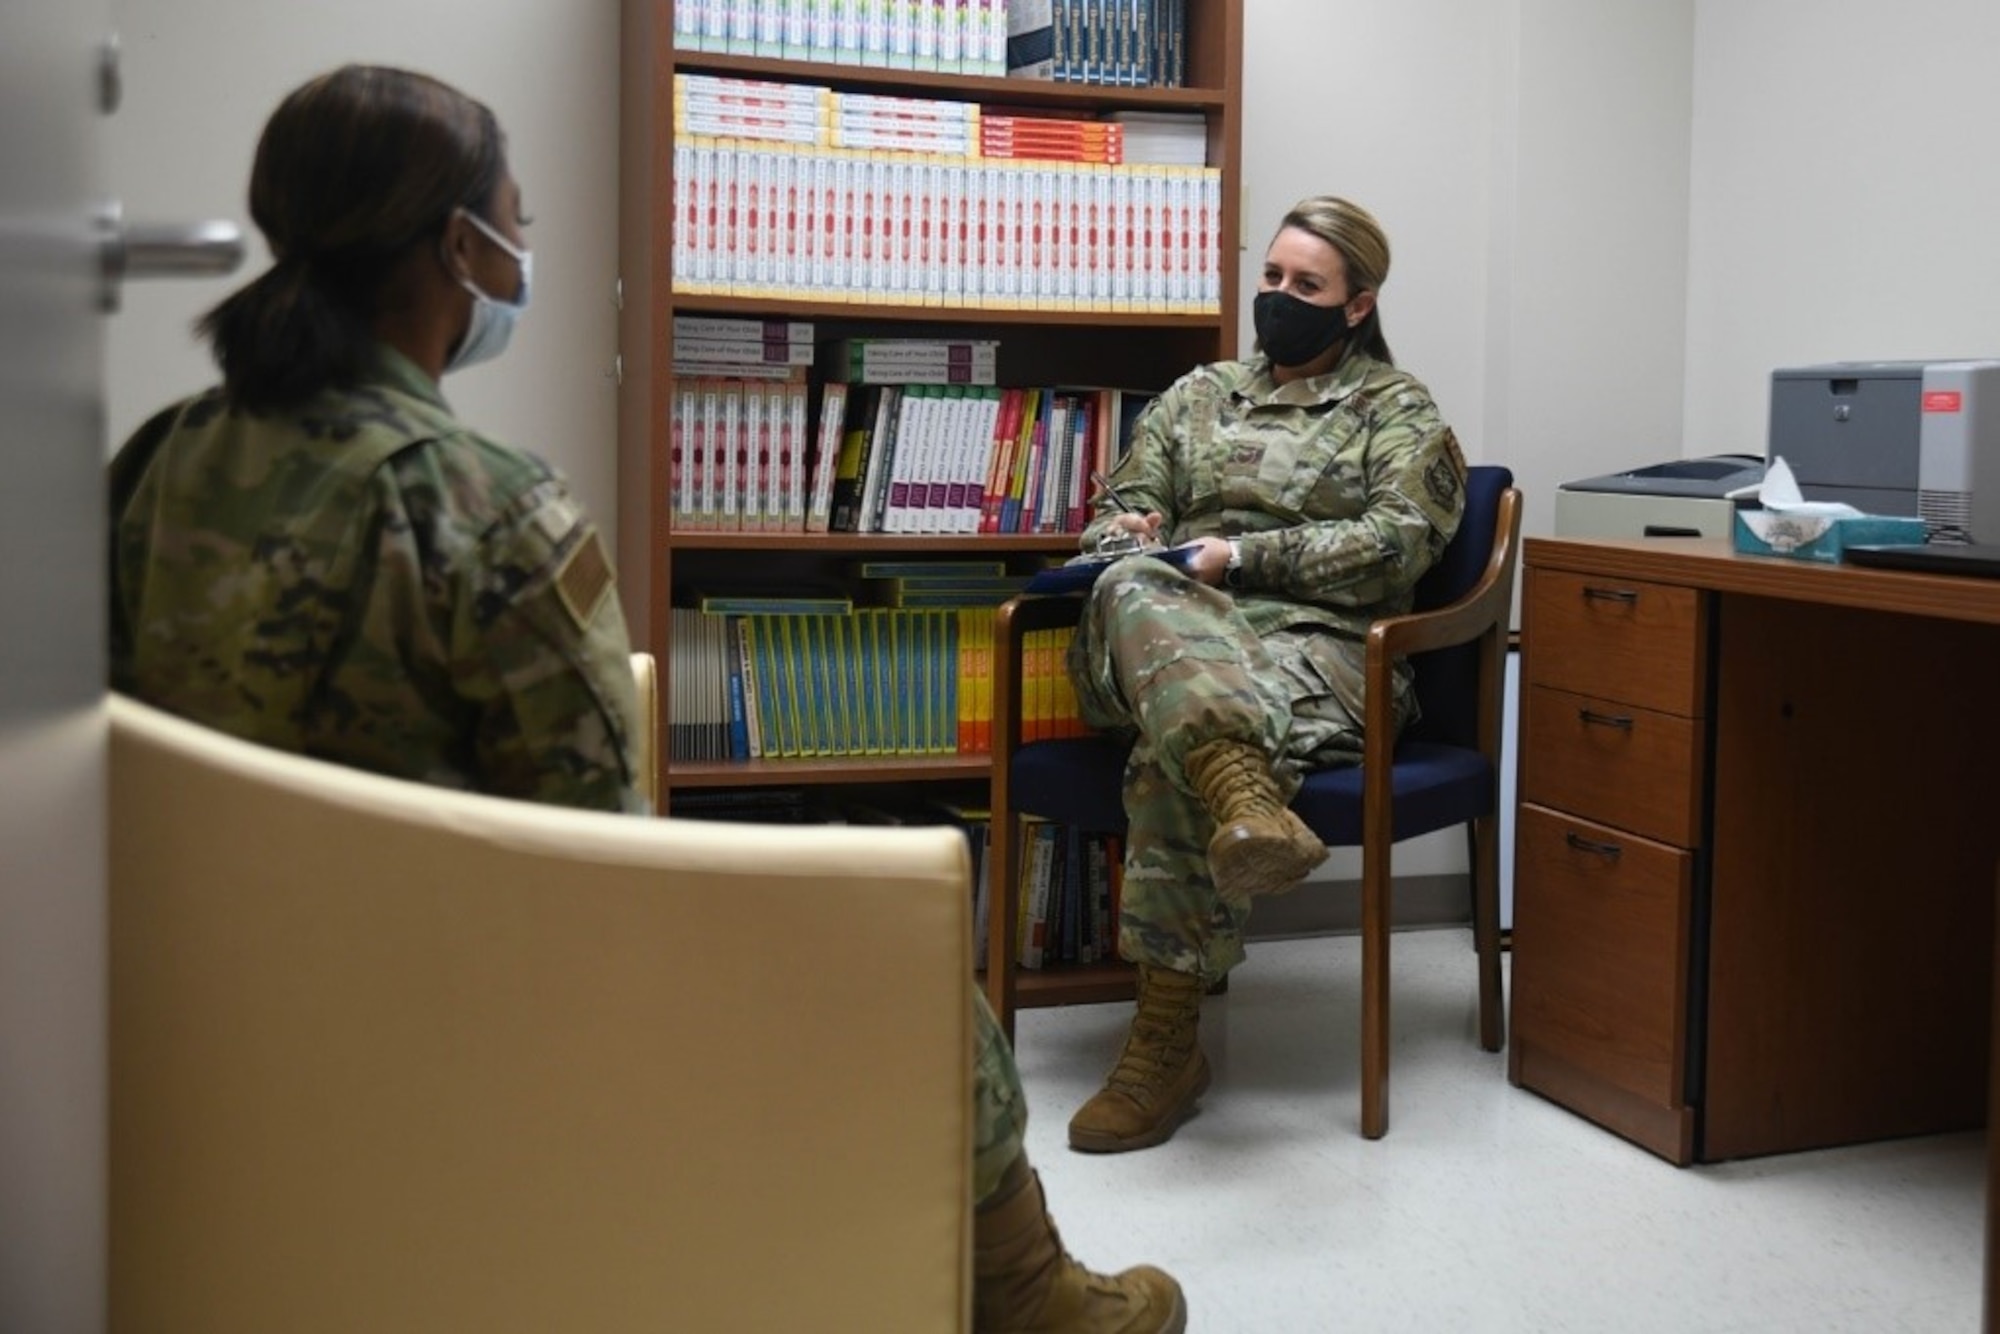 Staff Sgt. Alicia Delvaux, 22nd Medical Operations Squadron mental health technician, speaks to an Airman in her office during an appointment June 11, 2021, at McConnell Air Force Base, Kansas. Patients have the option of self-referral either via phone line or by stopping by the clinic during duty hours. (U.S. Air Force photo by Senior Airman Nilsa Garcia)